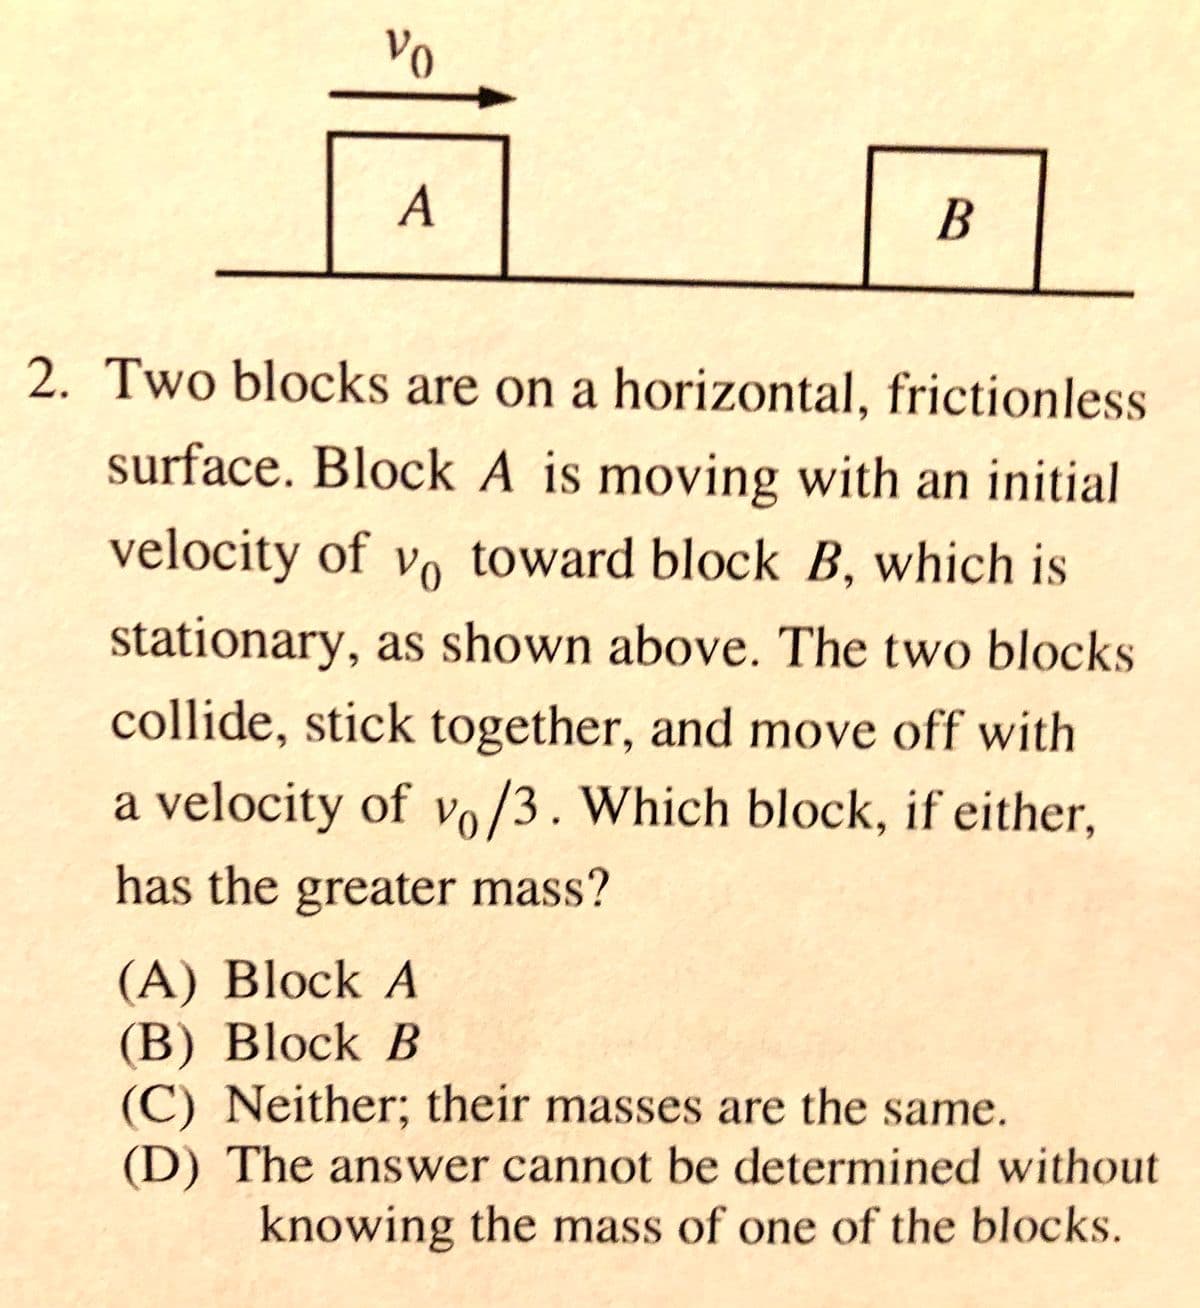 Vo
A
В
2. Two blocks are on a horizontal, frictionless
surface. Block A is moving with an initial
velocity of vo toward block B, which is
stationary, as shown above. The two blocks
collide, stick together, and move off with
a velocity of vo/3. Which block, if either,
has the greater mass?
(A) Block A
(В) Block B
(C) Neither; their masses are the same.
(D) The answer cannot be determined without
knowing the mass of one of the blocks.
